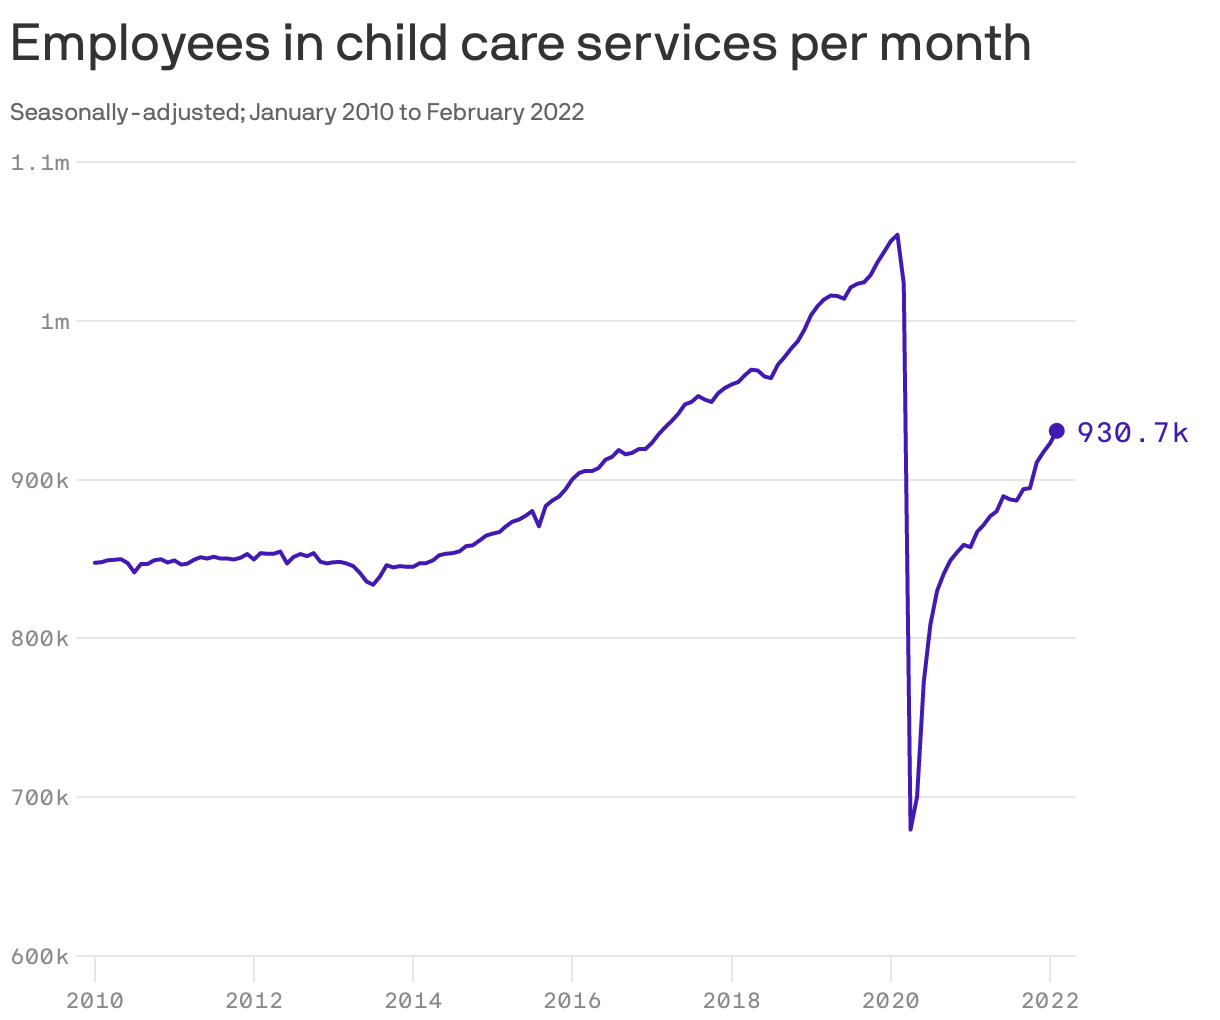 Employees in child care services per month